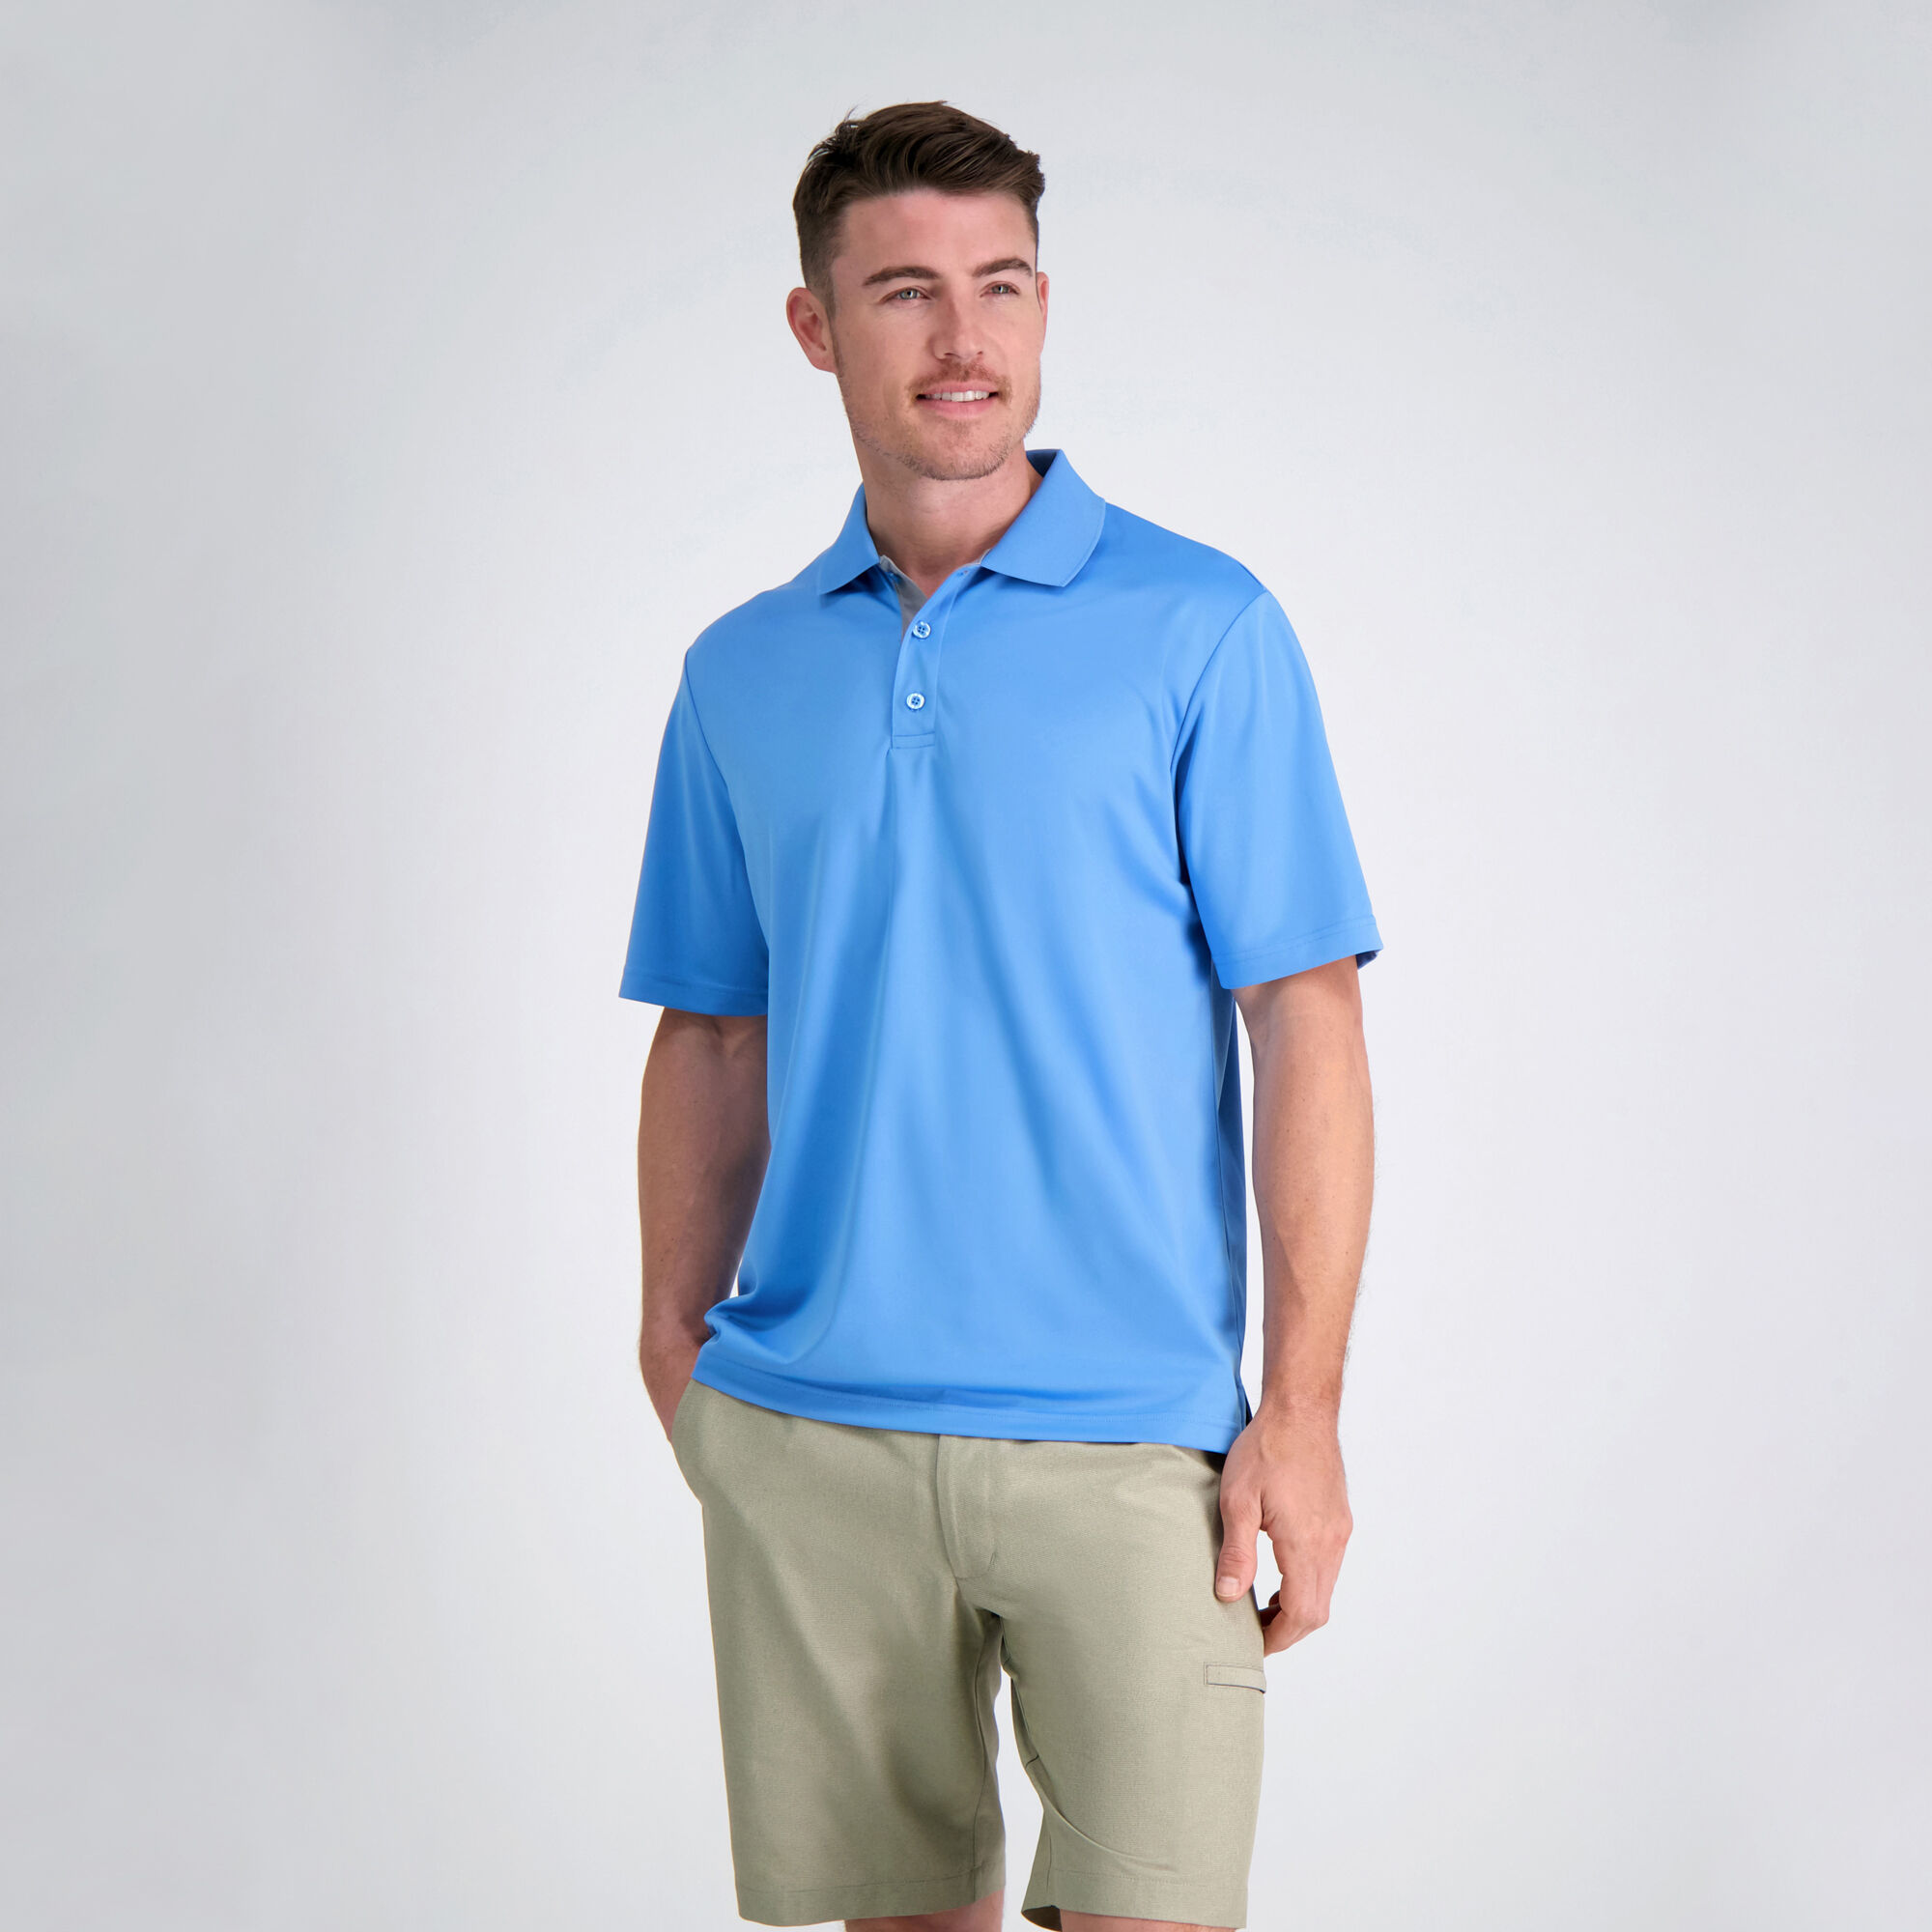 Haggar The Active Series Performance Poly Polo Light Blue (HK10070 Clothing Shirts & Tops) photo